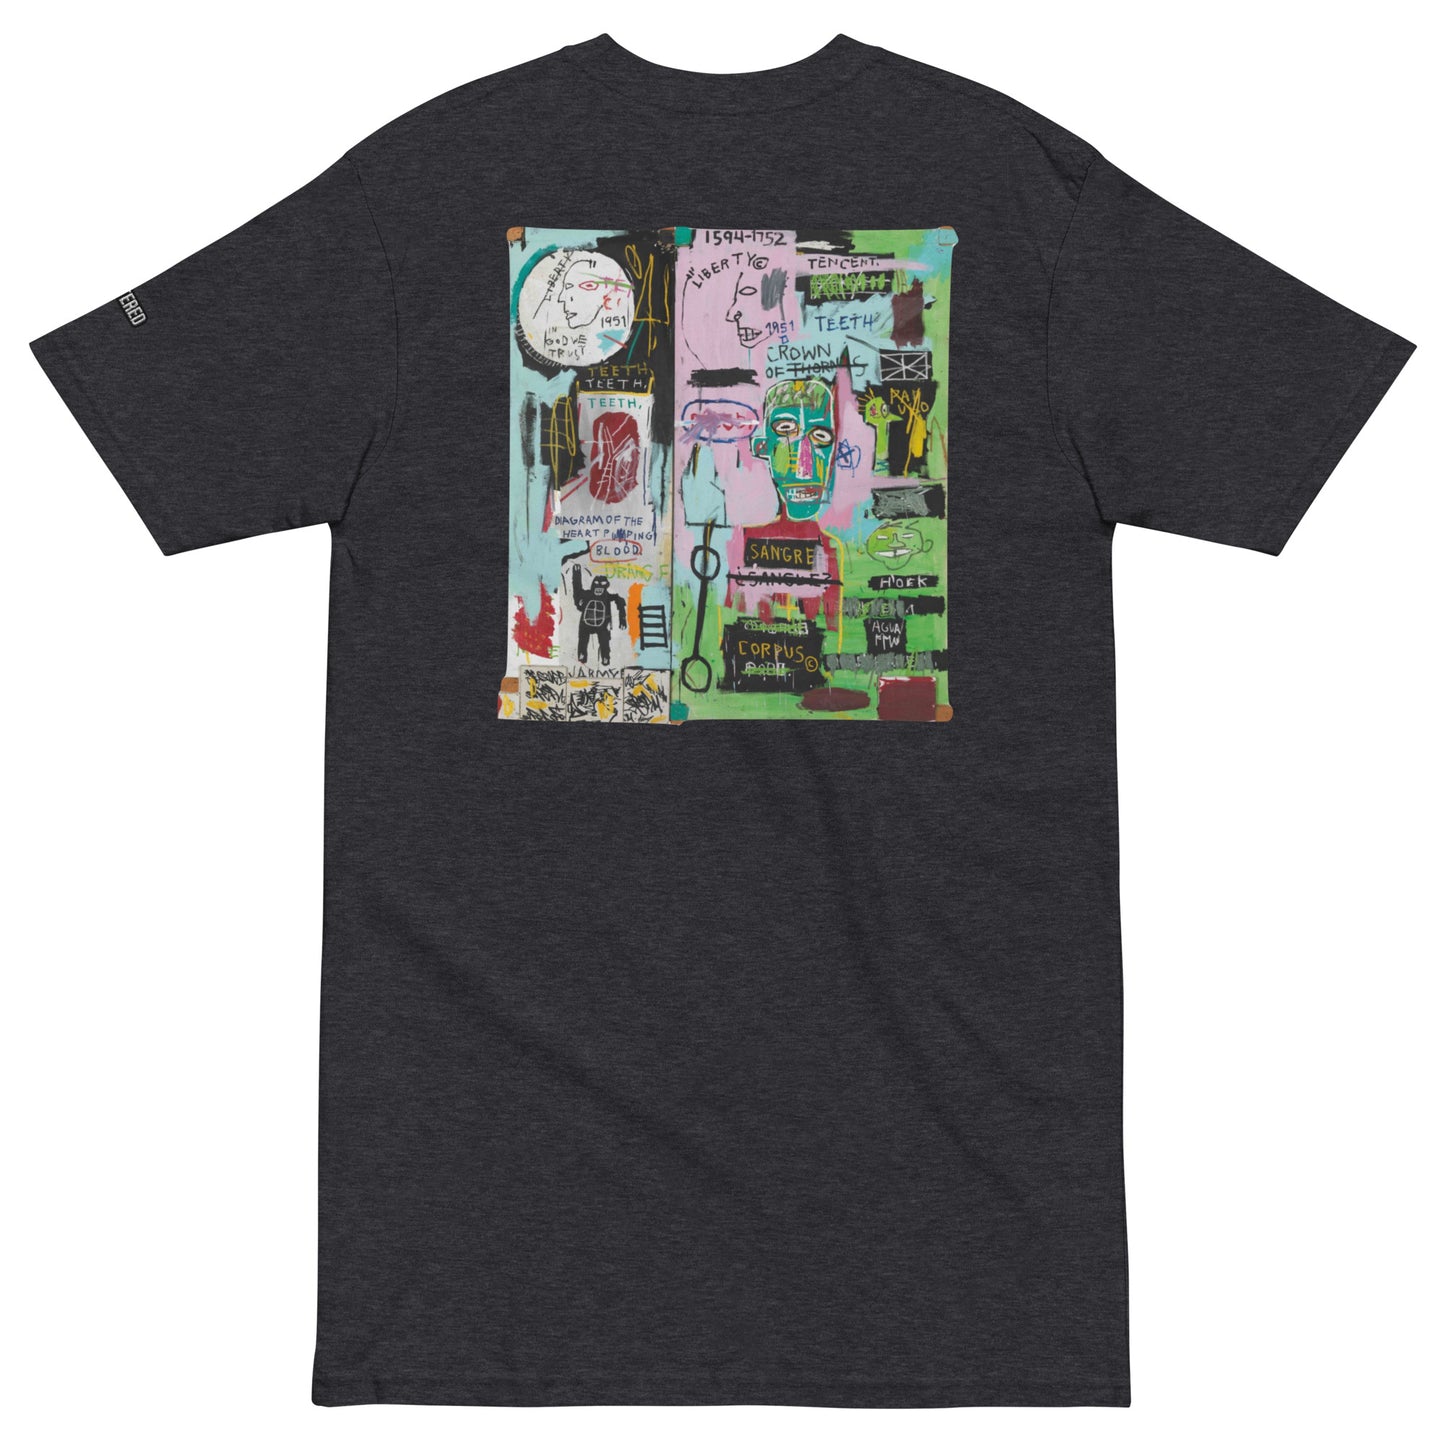 Jean-Michel Basquiat "In Italian" Artwork Embroidered and Printed Premium Charcoal Grey Streetwear T-Shirt Scattered